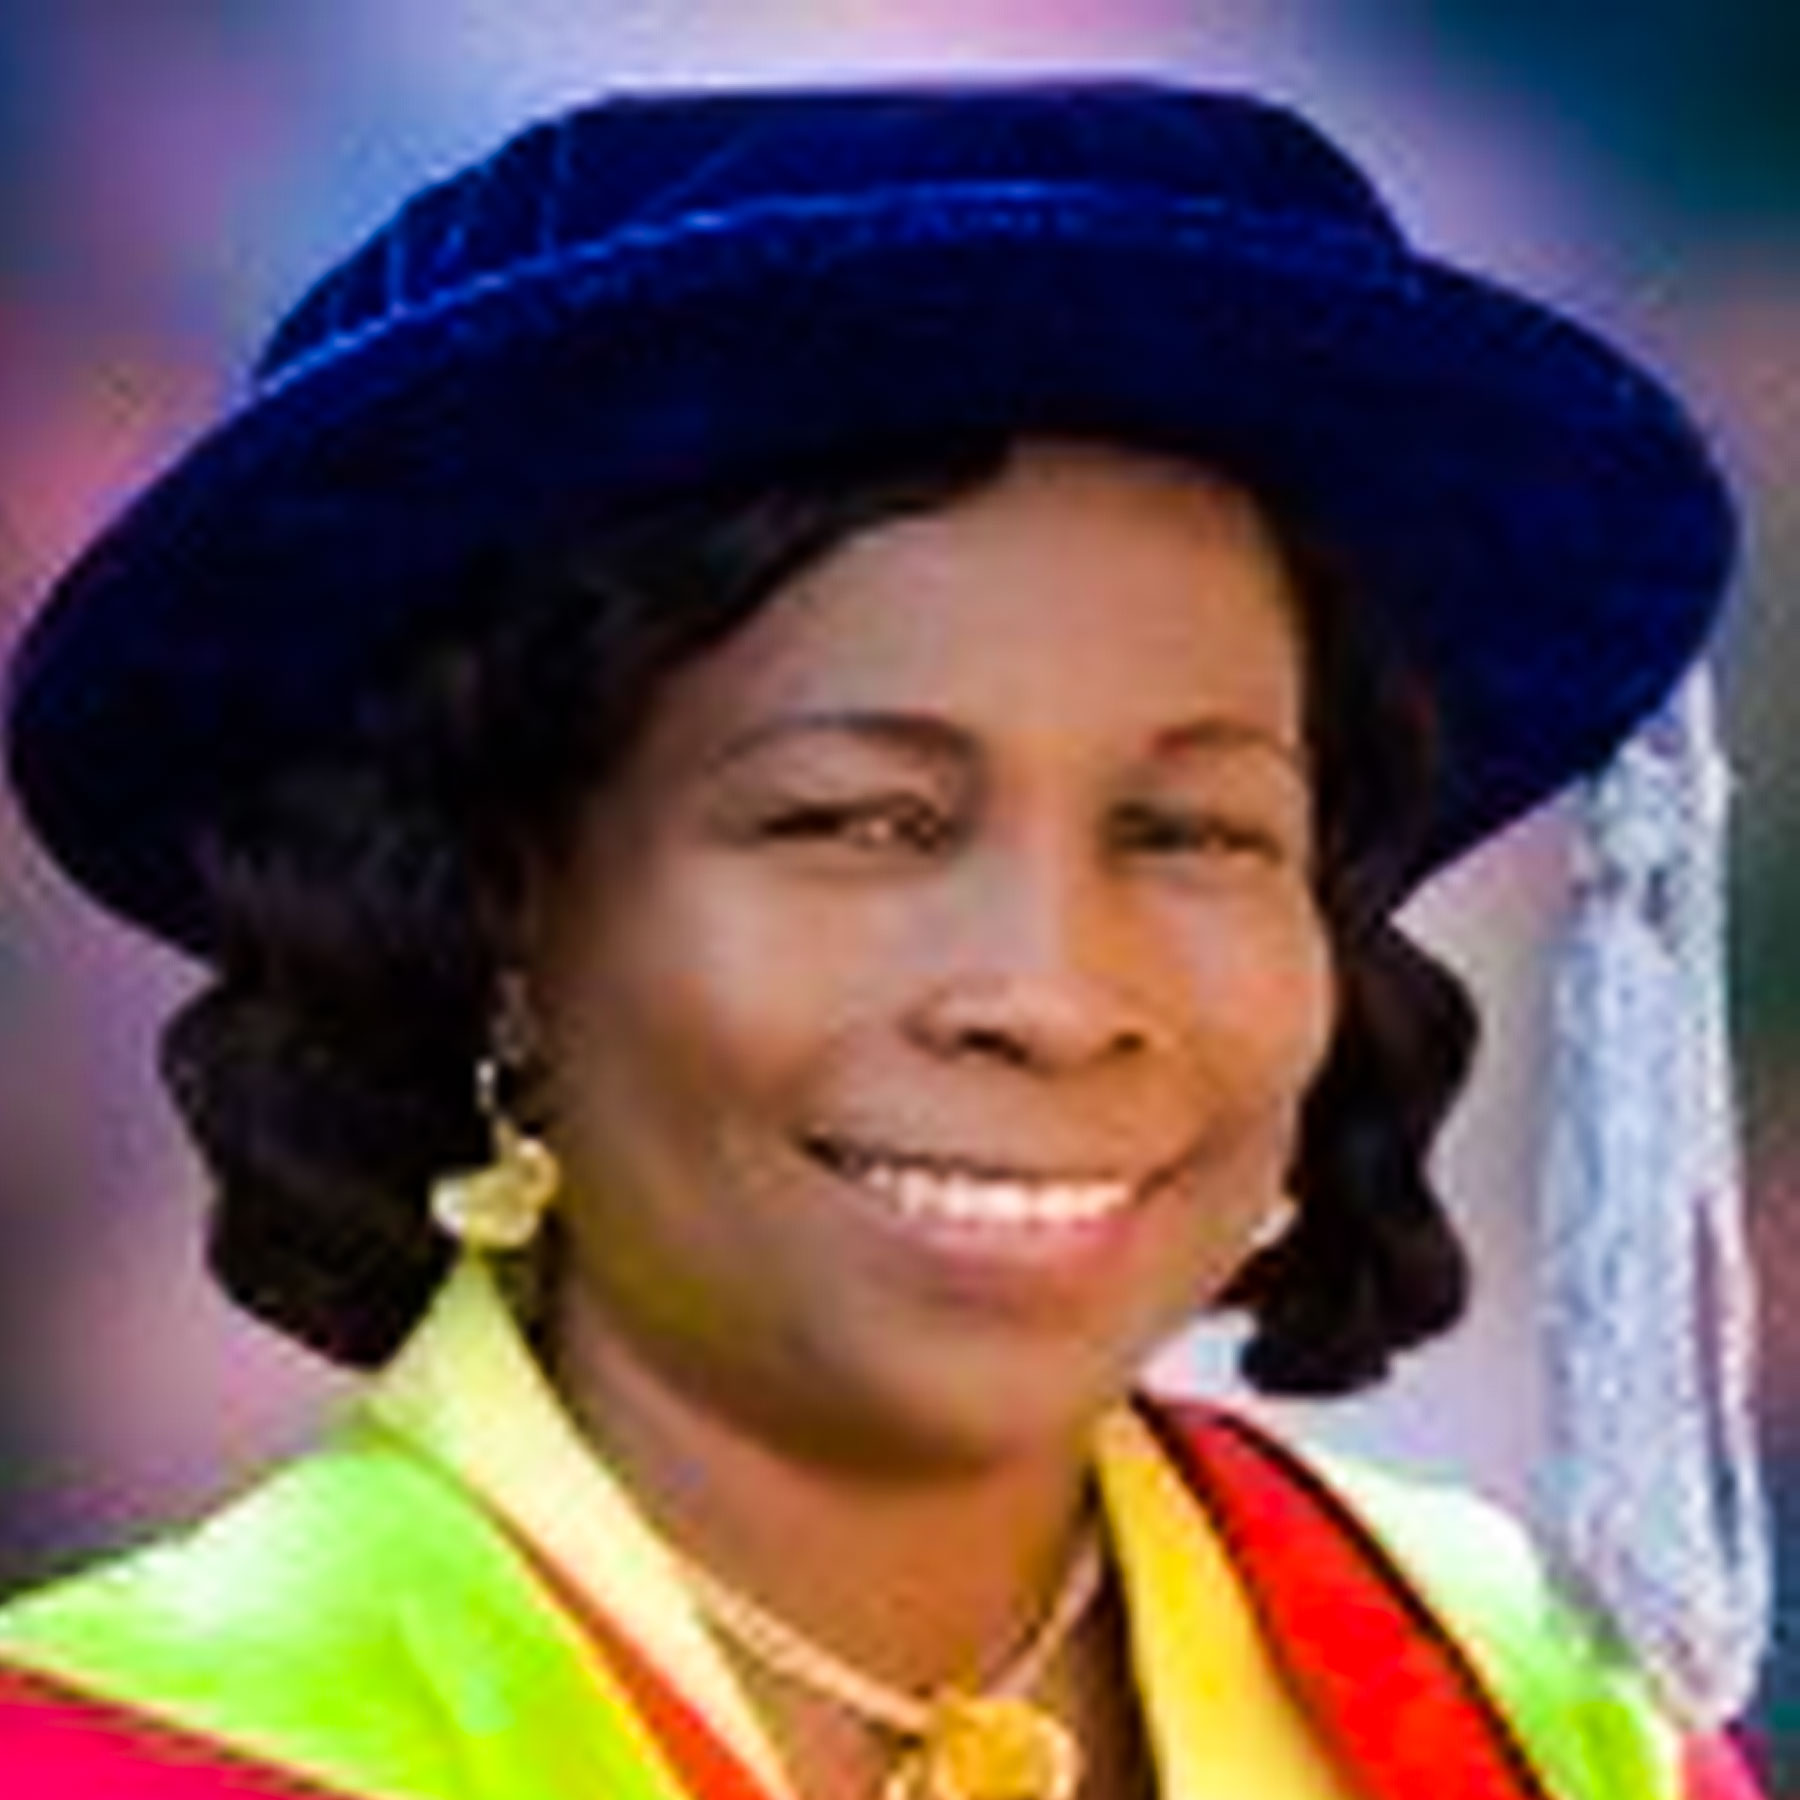 APPOINTMENT OF DR. GRACE ADA AJUWON AS MEDICAL LIBRARIAN IN THE E. LATUNDE ODEKU MEDICAL LIBRARY OF THE COLLEGE OF MEDICINE, UNIVERSITY OF IBADAN